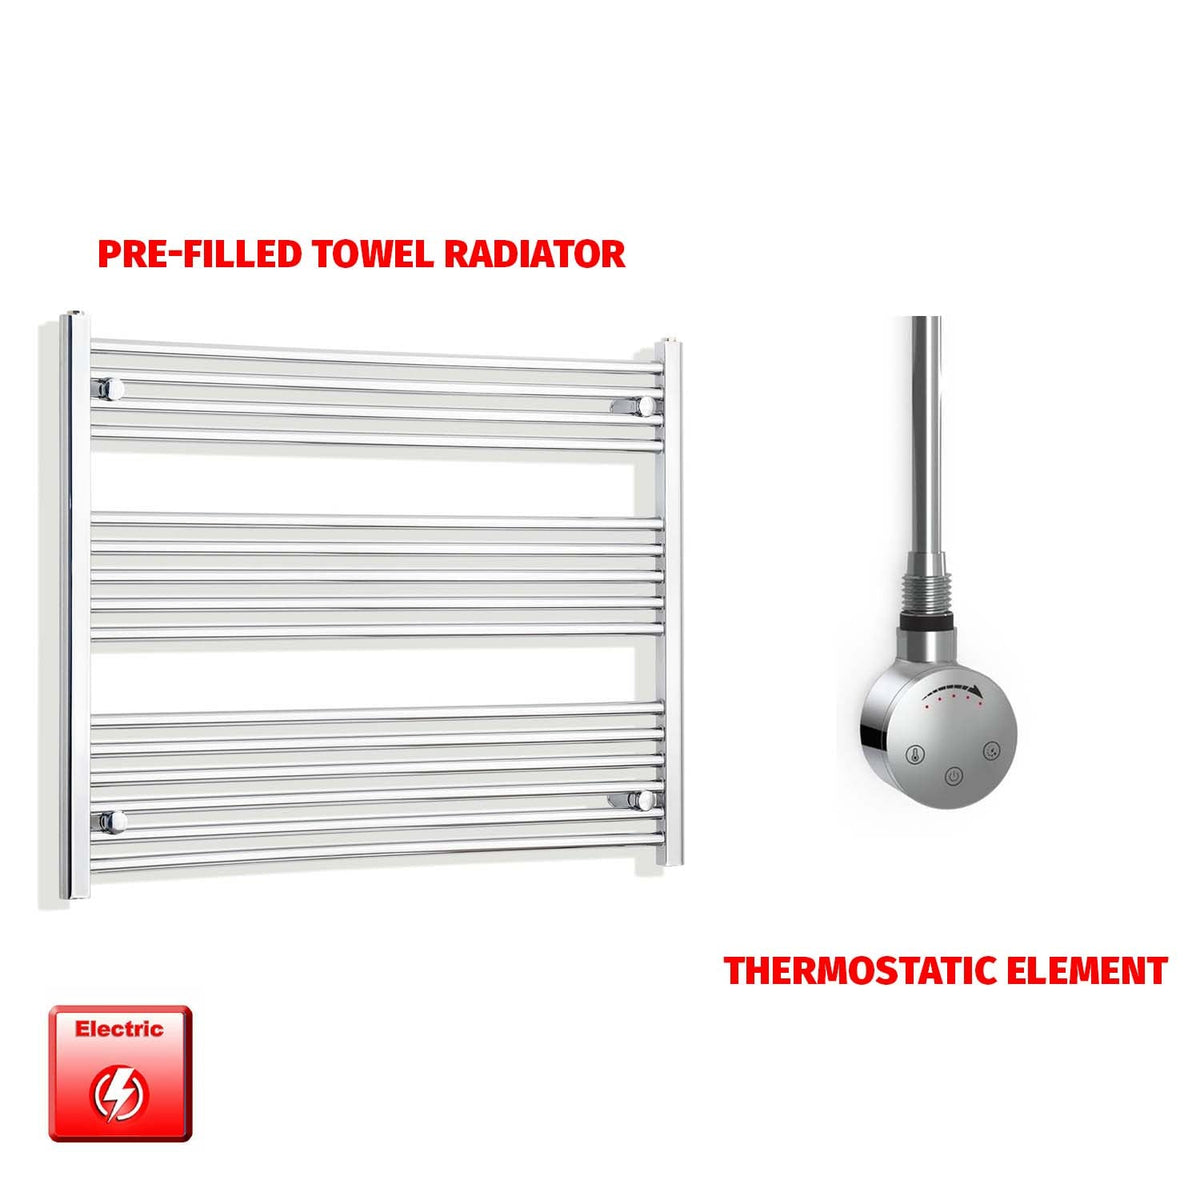 800mm High 950mm Wide Pre-Filled Electric Heated Towel Rail Radiator Straight Chrome SMR Thermostatic element no timer